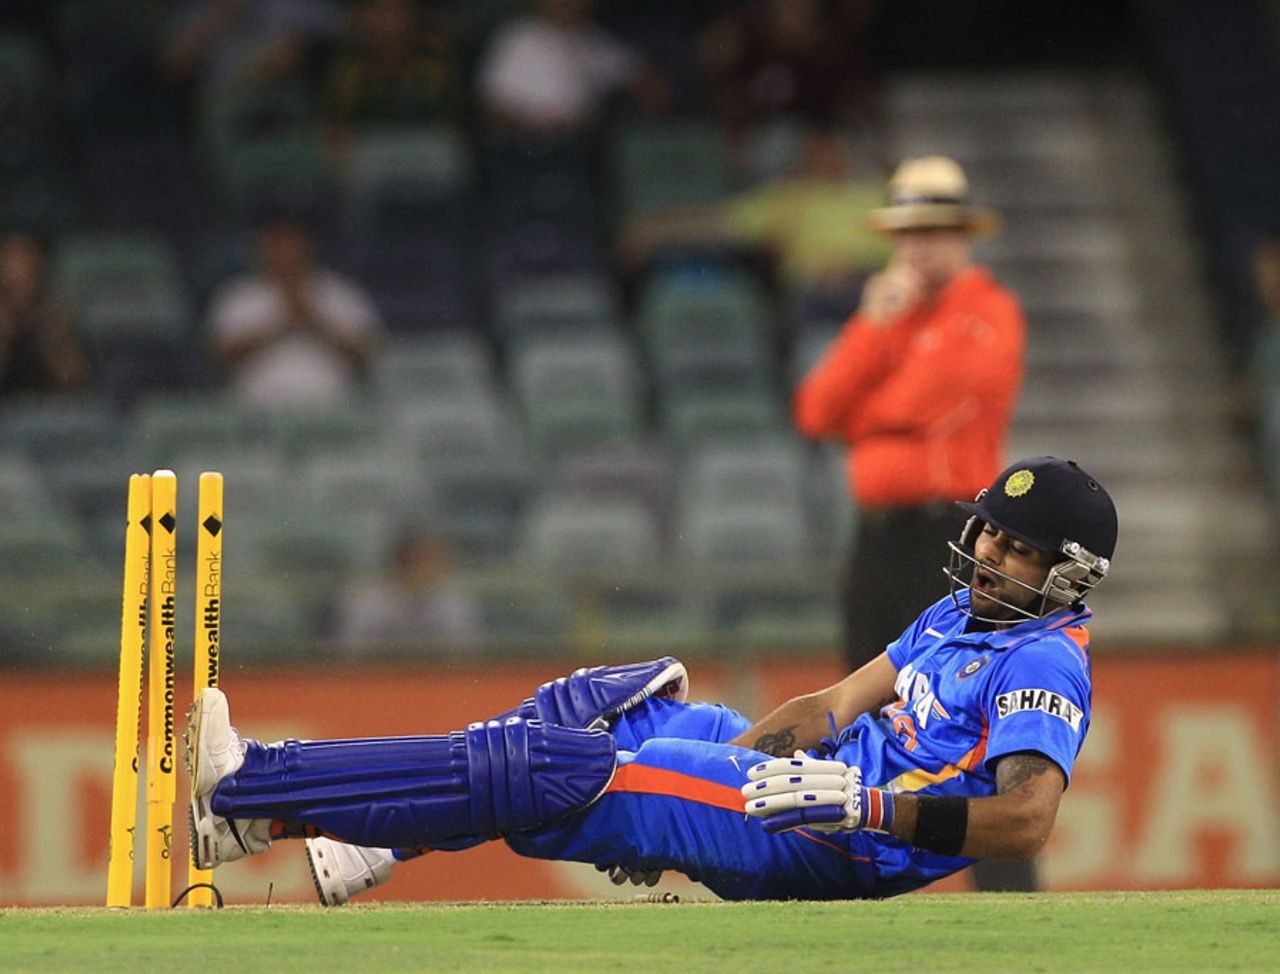 Virat Kohli goes down with a bout of cramps even as he is run out, India v Sri Lanka, CB Series, 2nd ODI, Perth, February 8, 2012